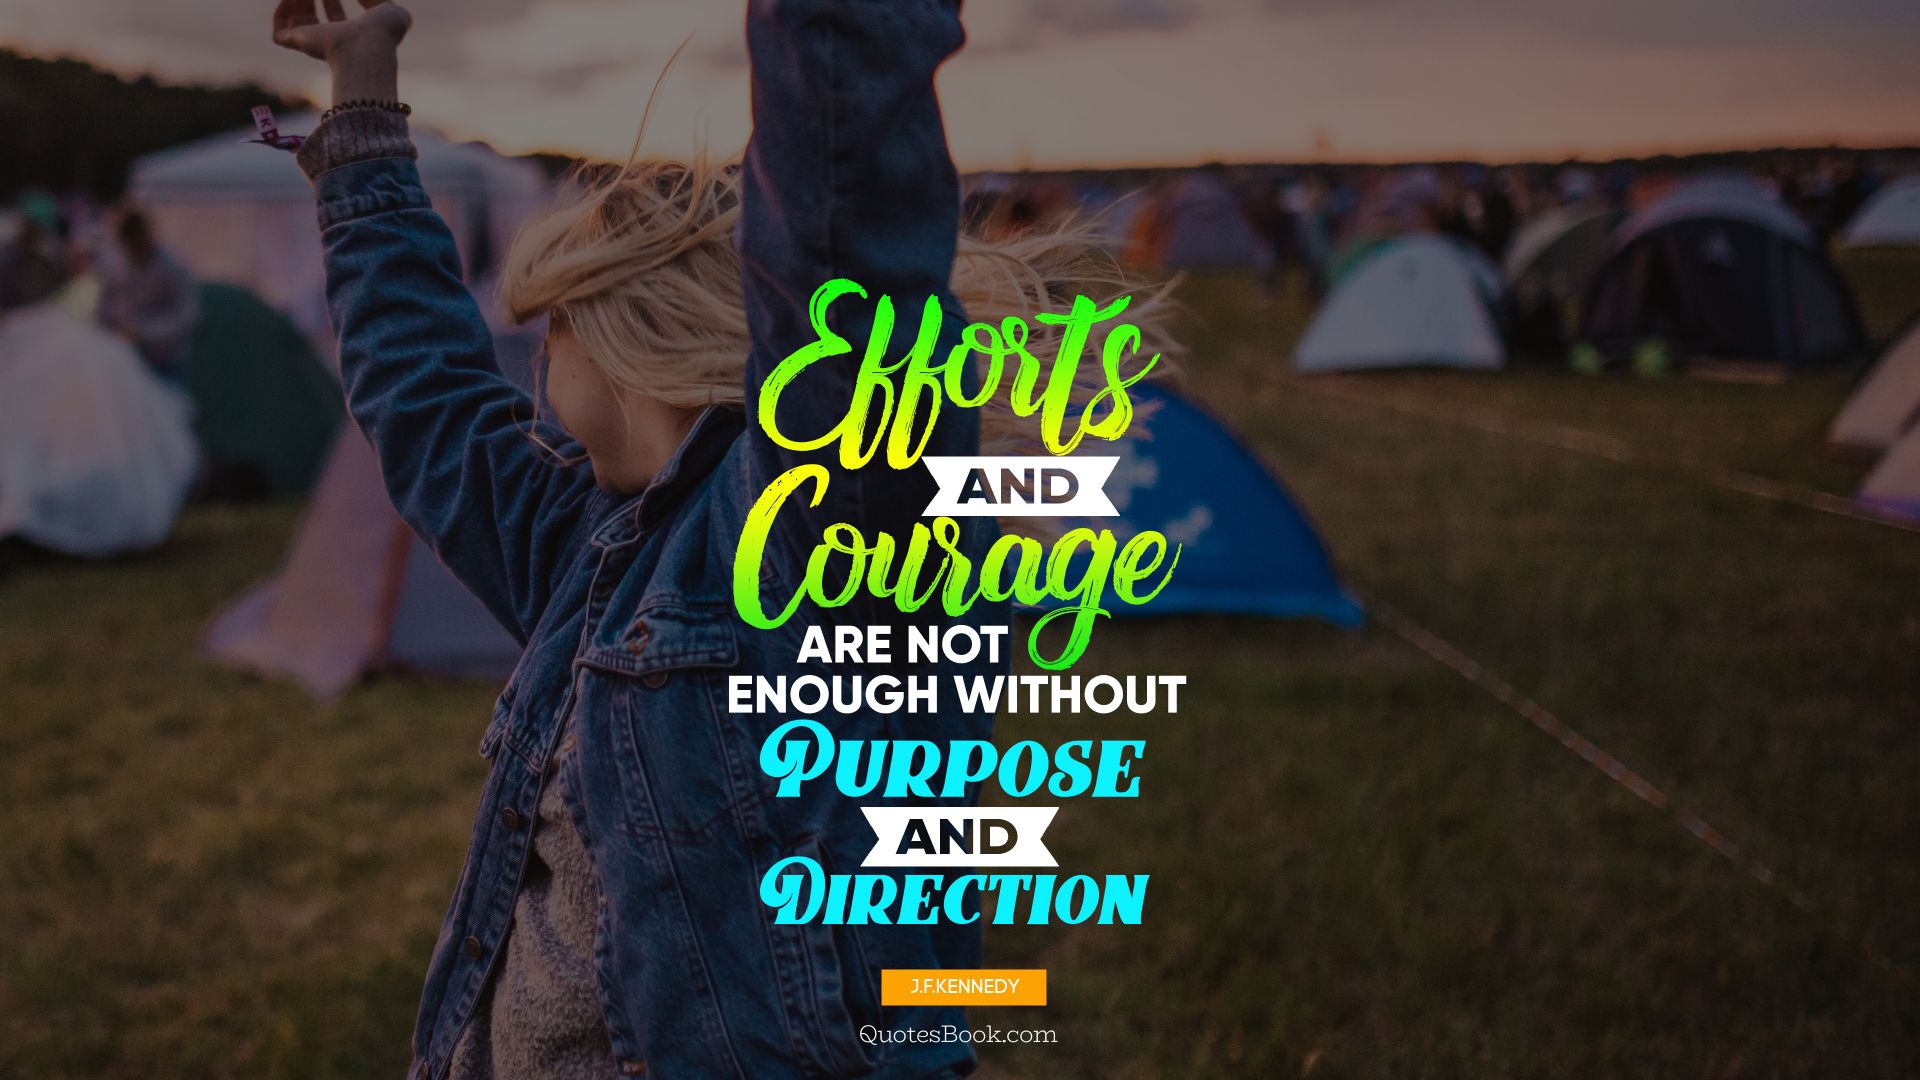 Еfforts and courage are not enough without purpose and direction. - Quote by John F. Kennedy